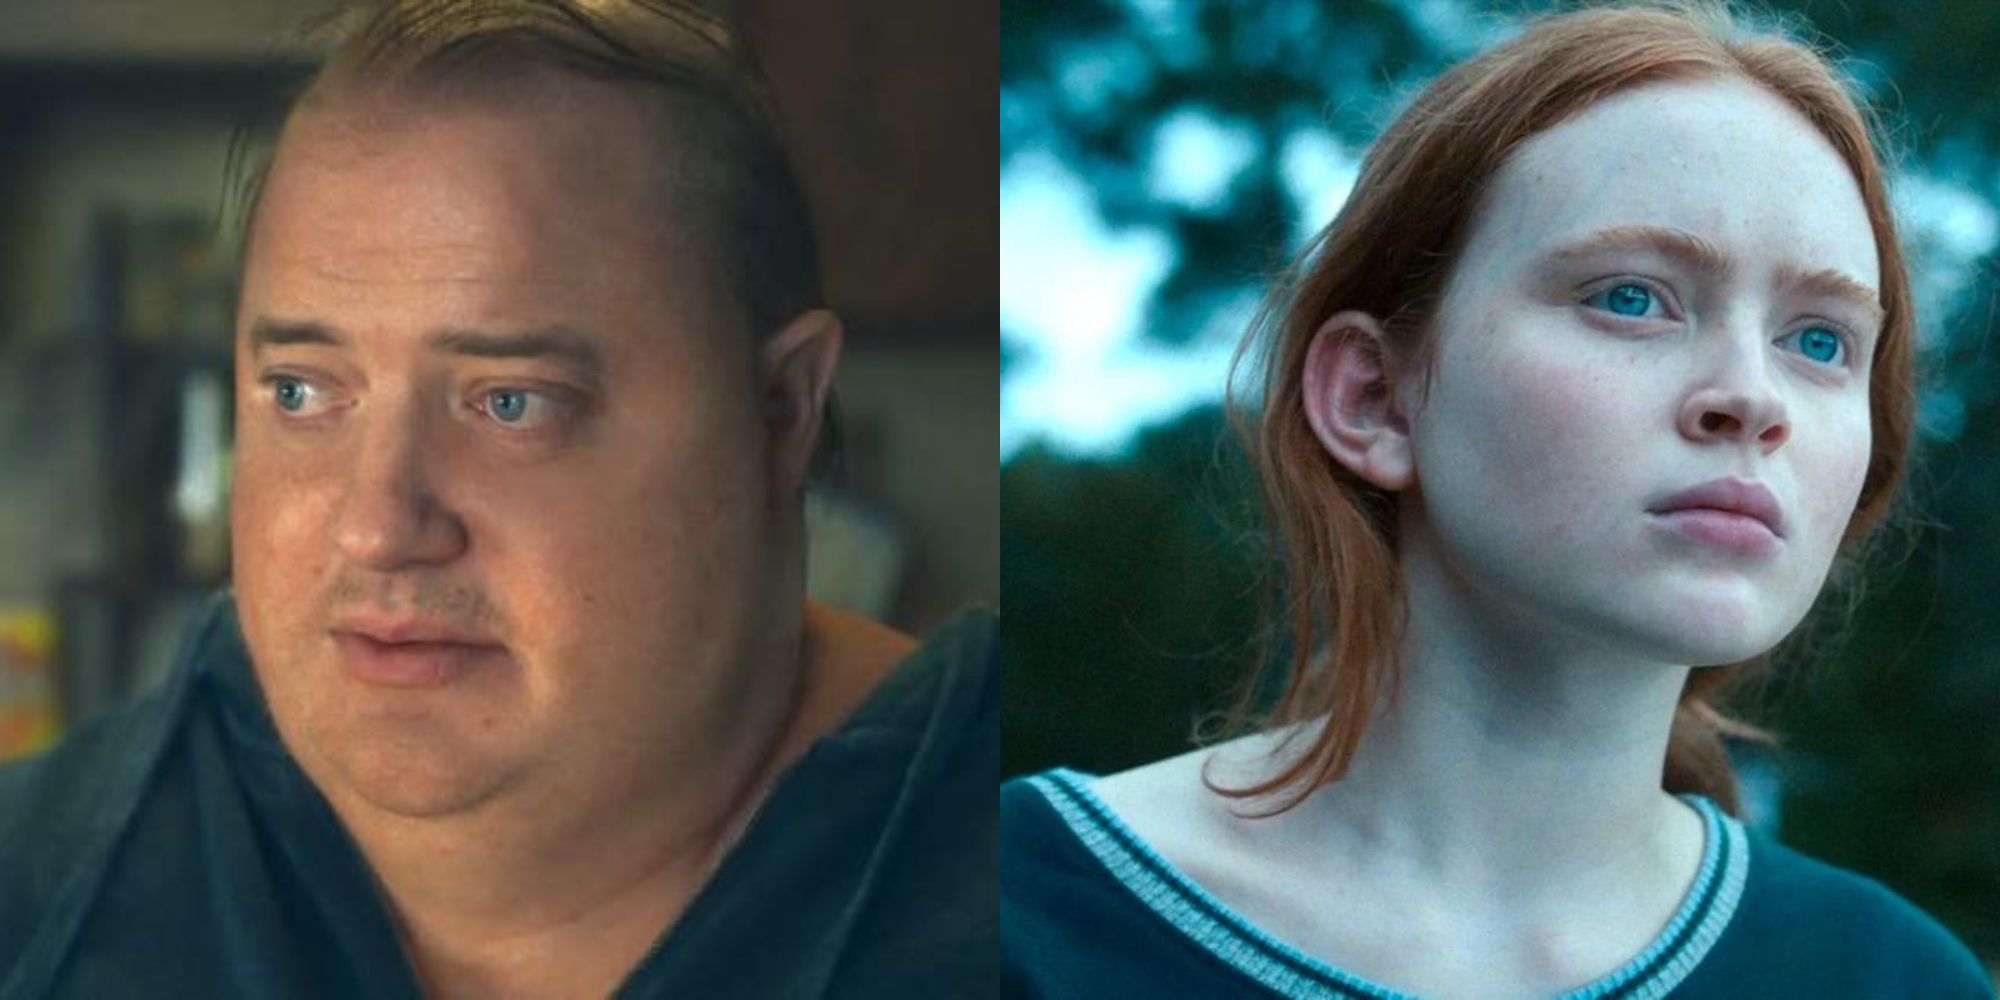 Split image showing Brendan Fraser in The Whale and Sadie Sink in Stranger Things